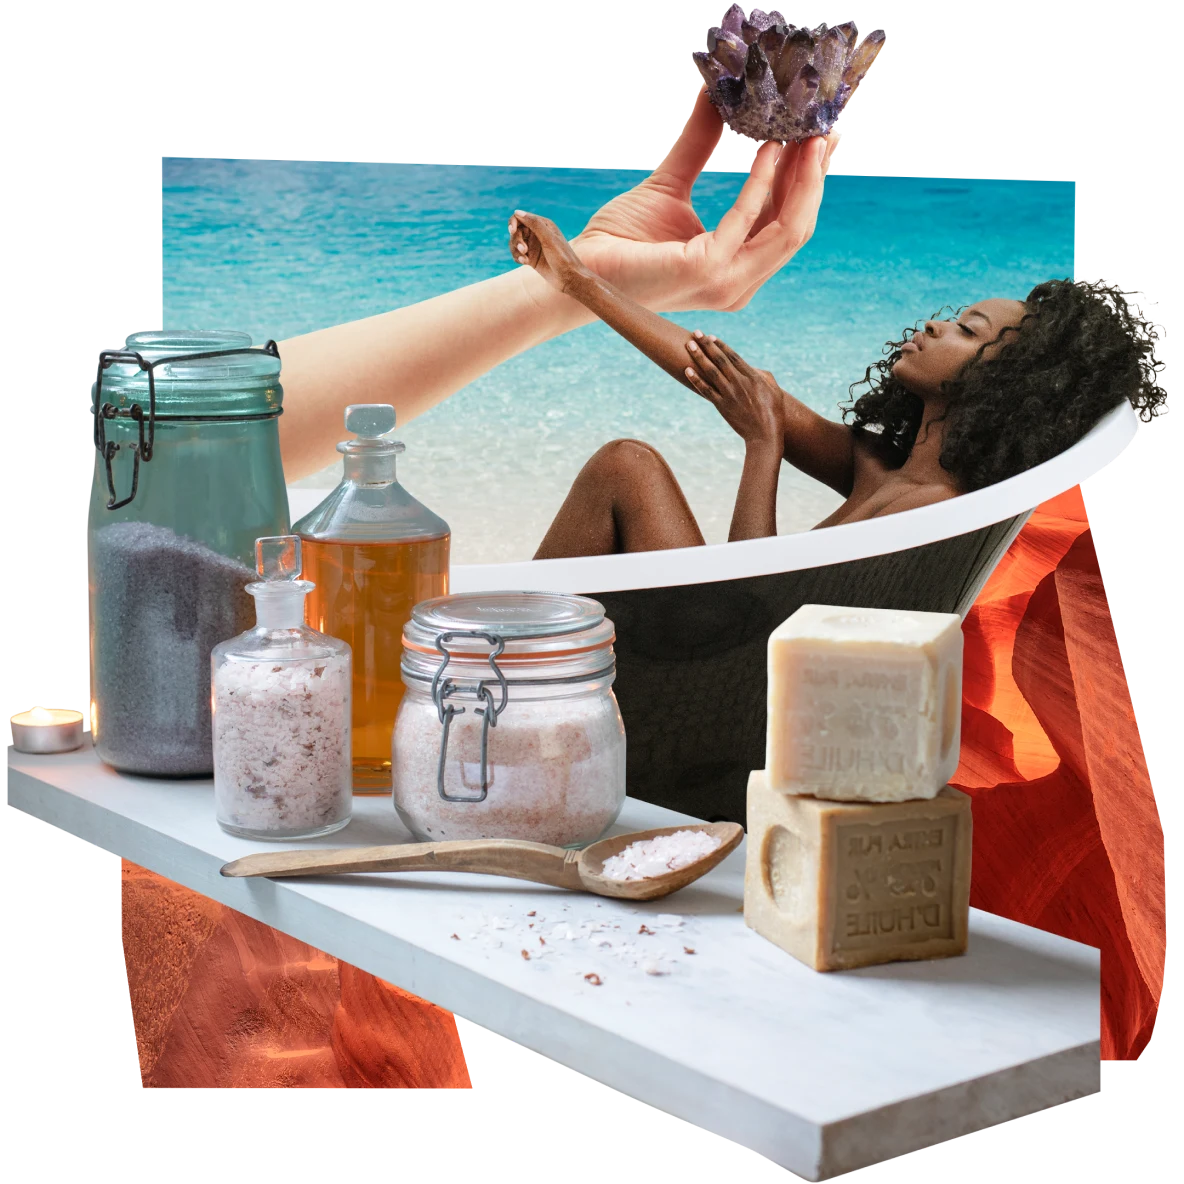 Collage of natural items. Several glass containers and jar are filled with salts and oils. Big blocks of soap are stacked on the right. A Black woman lounges in a dark wood and porcelain bath, against a blue sea backdrop.